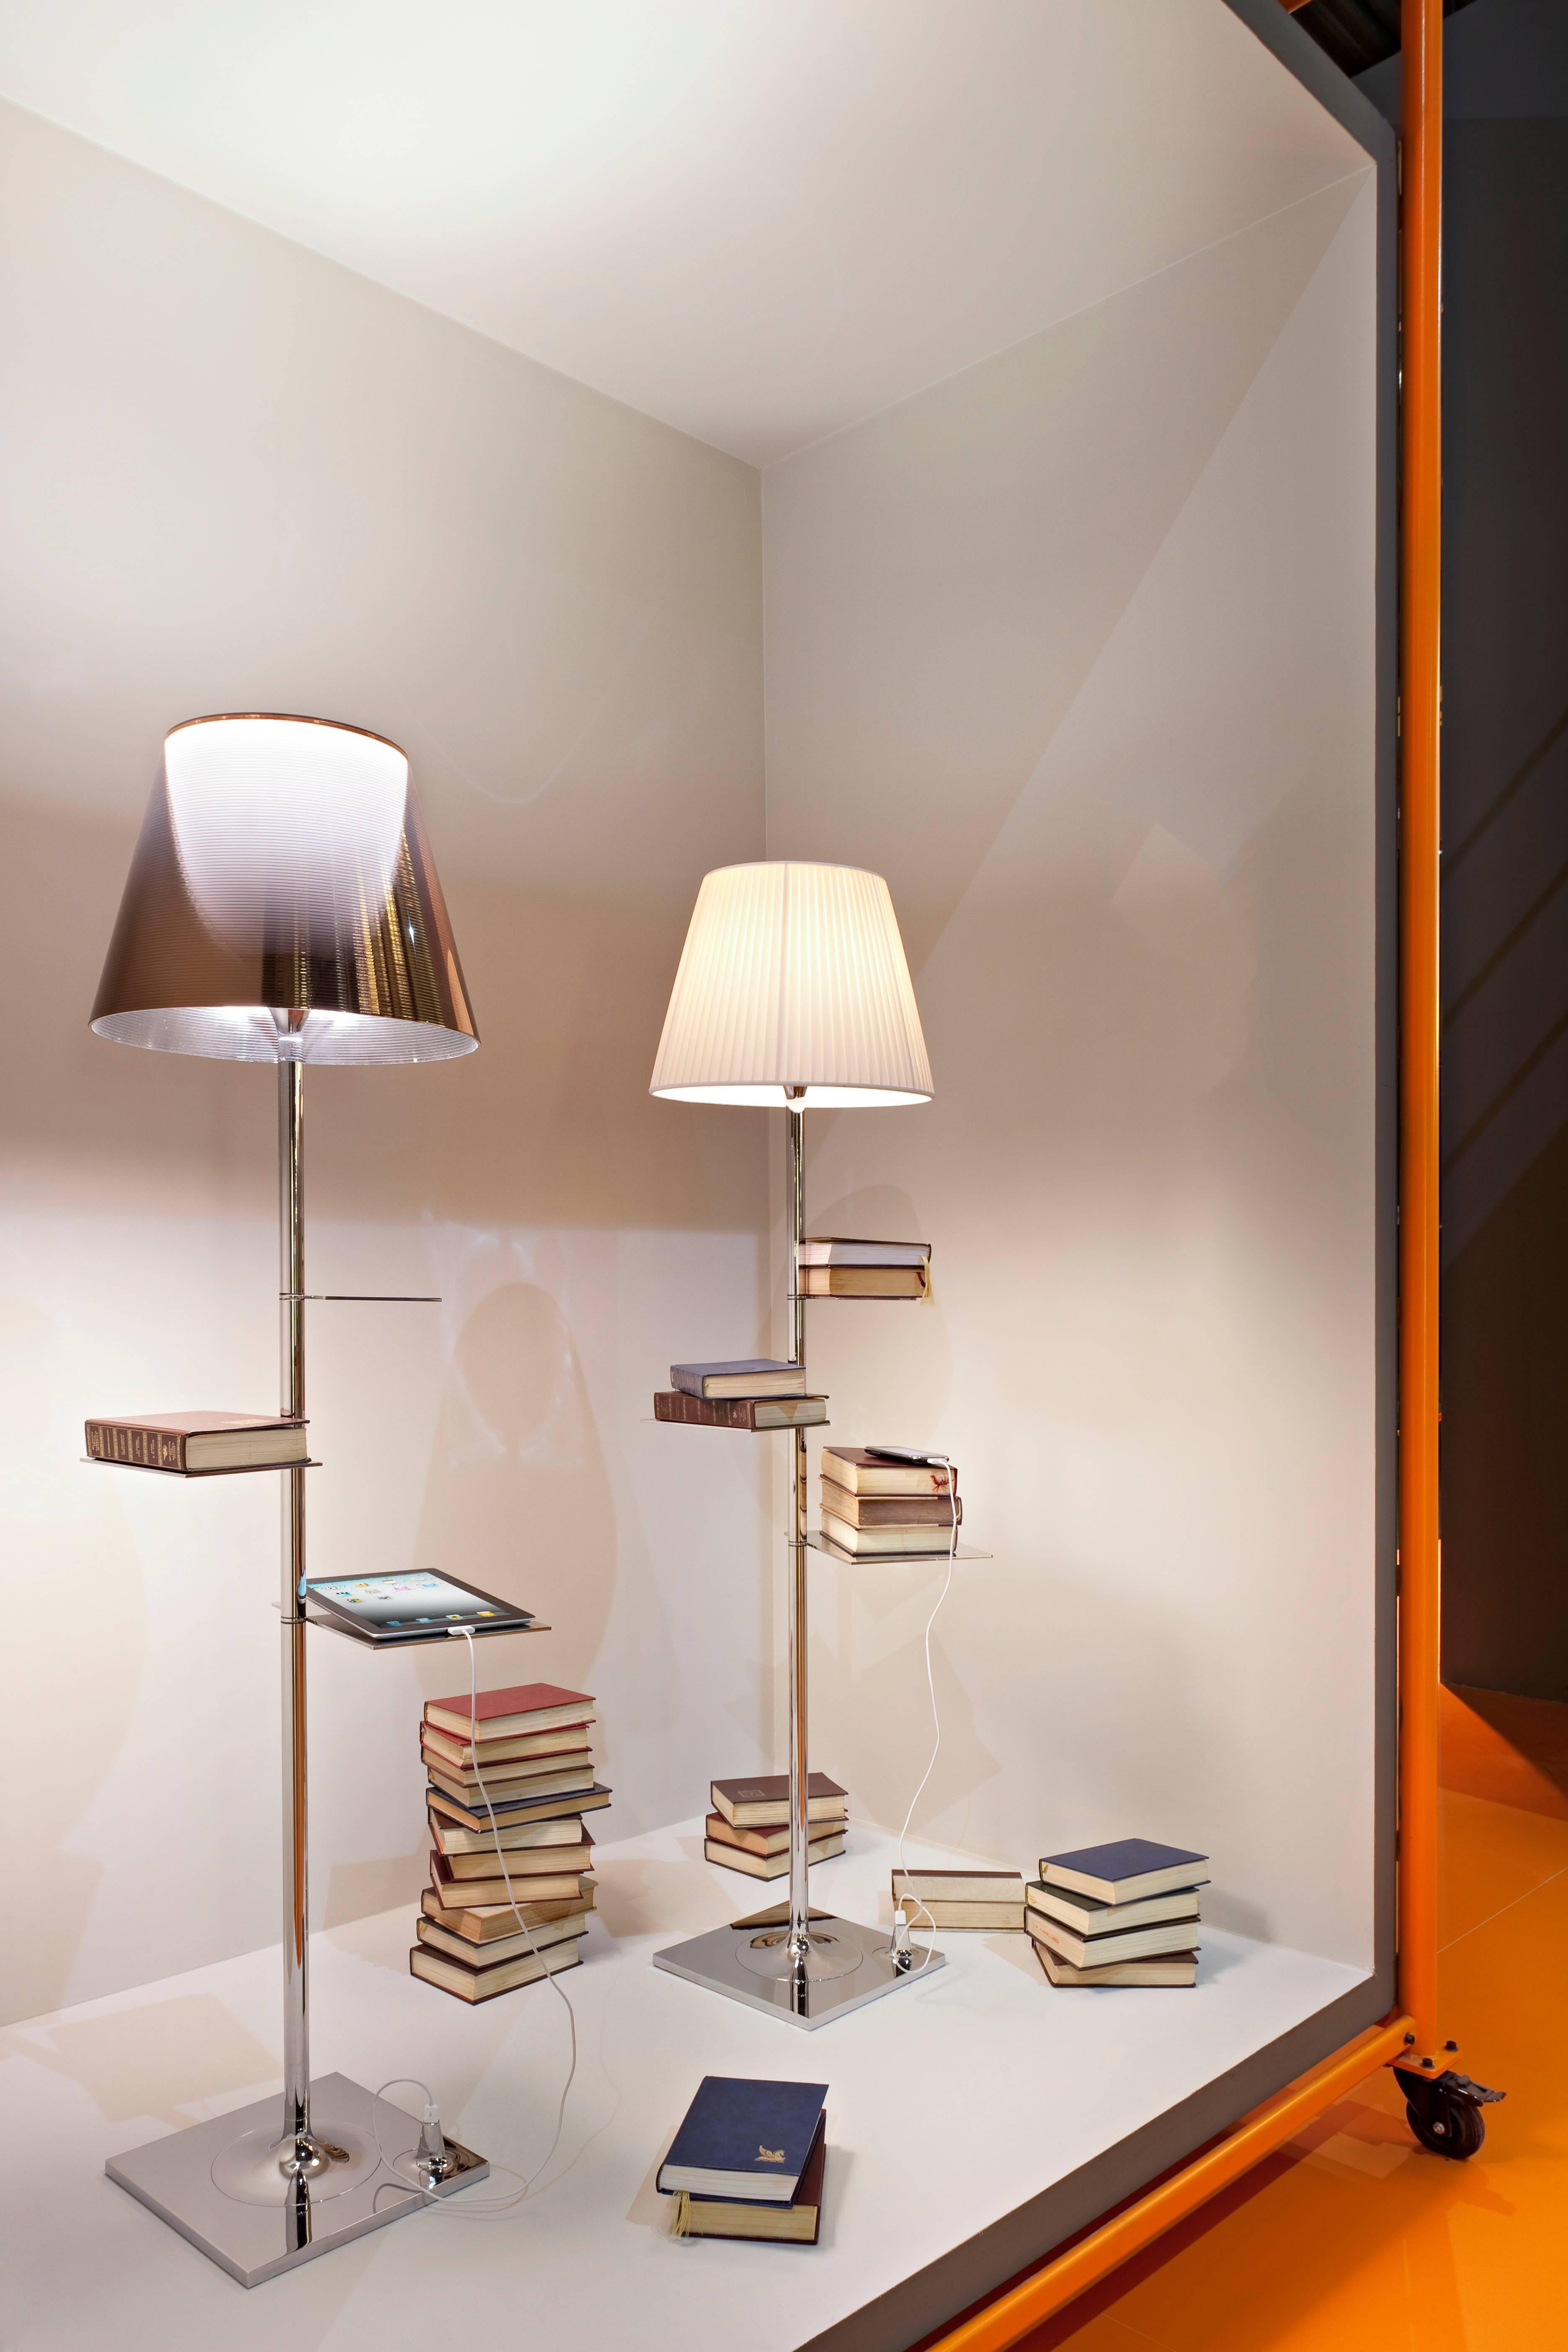 There's more than meets the eye with this 2013 Phillippe Starck creation: Illuminating your home with a diffused light, the Biblioteque Nationale also serves as a strikingly modern bookshelf and offers a convenient portable device charger. The base,